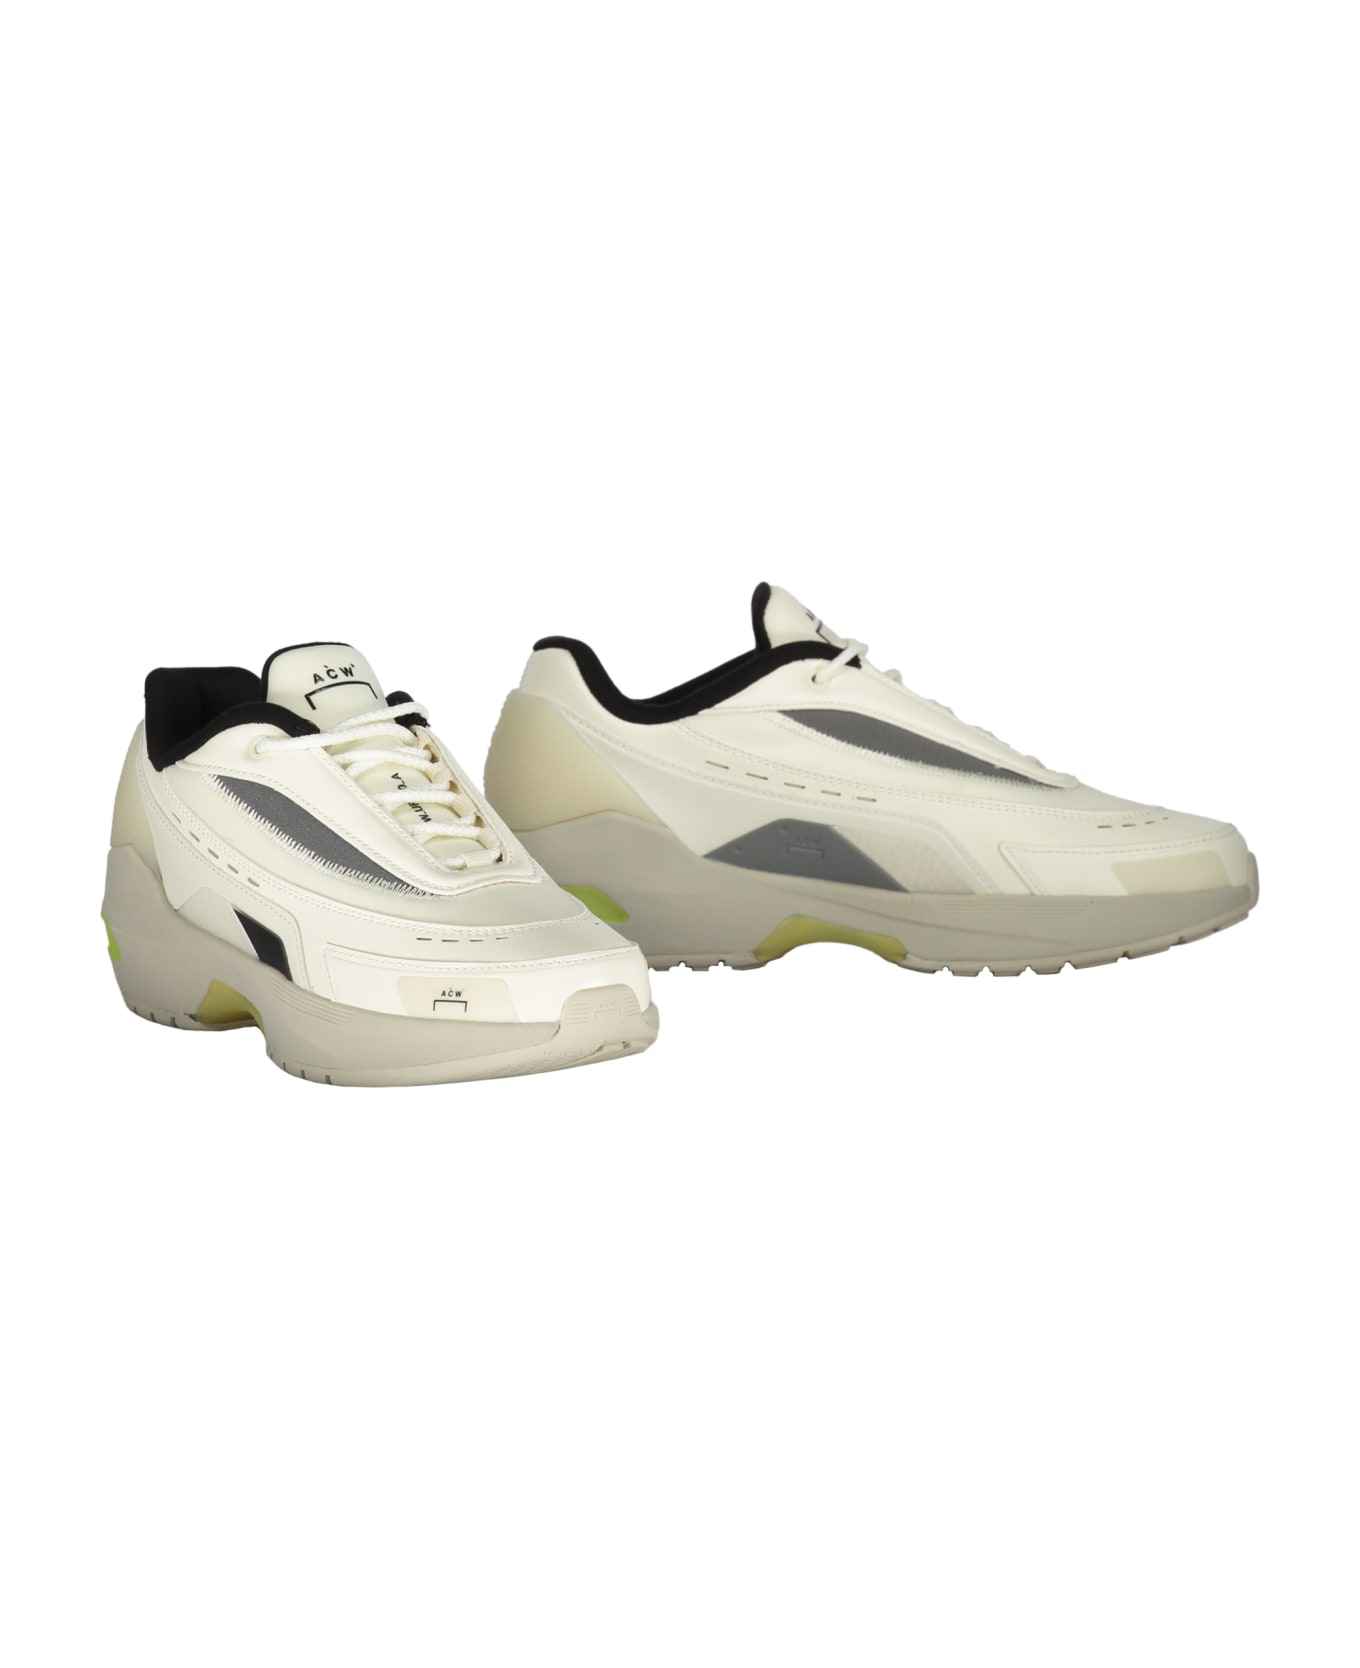 A-COLD-WALL Running Sneakers - Ivory